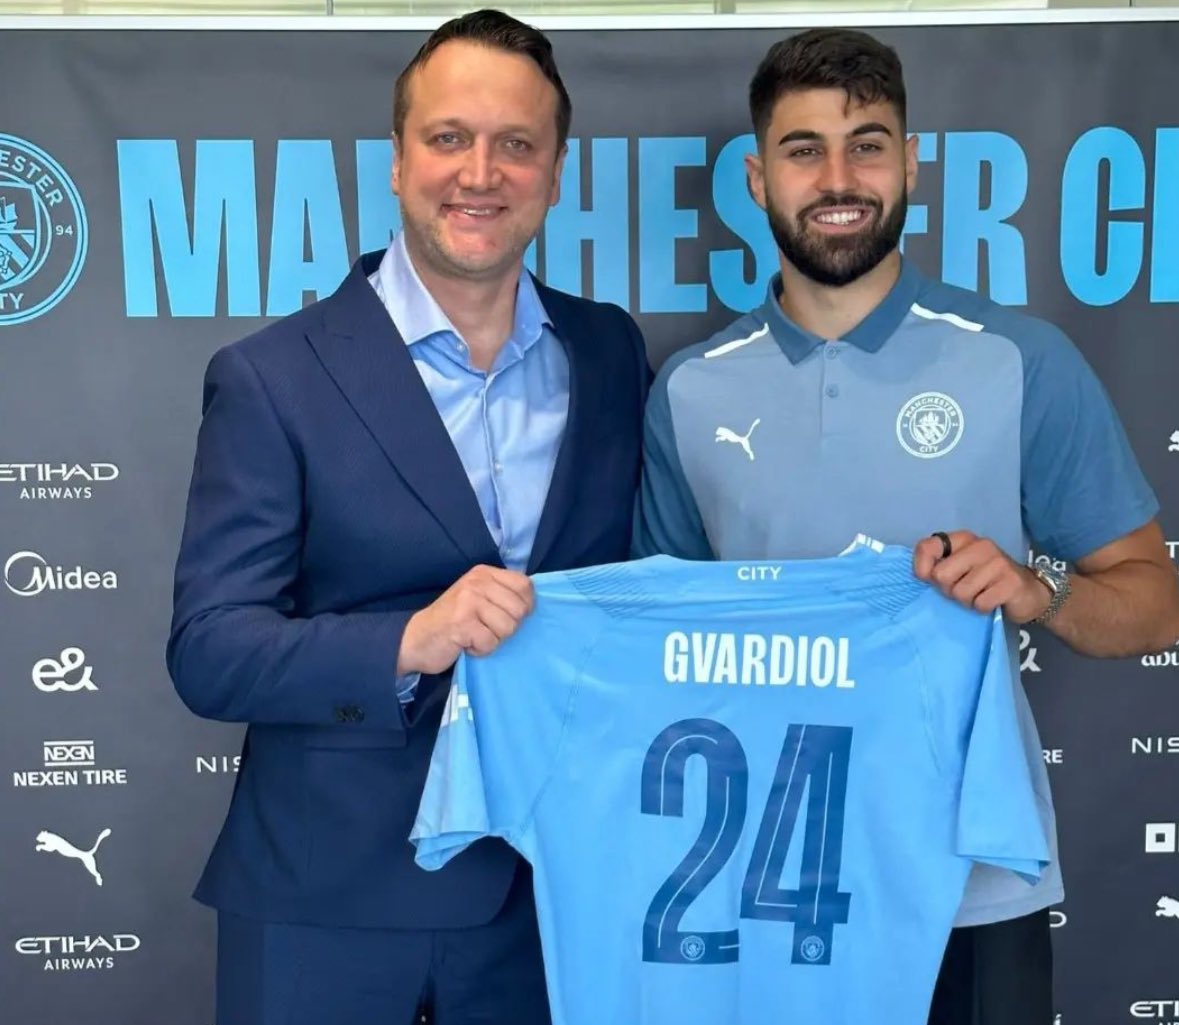 🔵🇭🇷 EXCL — Joško Gvardiol’s agent Marjan Šišić: “He’s really delighted to be at Manchester City. He strongly wanted to join City last summer”.

“Joško knew #MCFC project was the best option possible and he was right”.